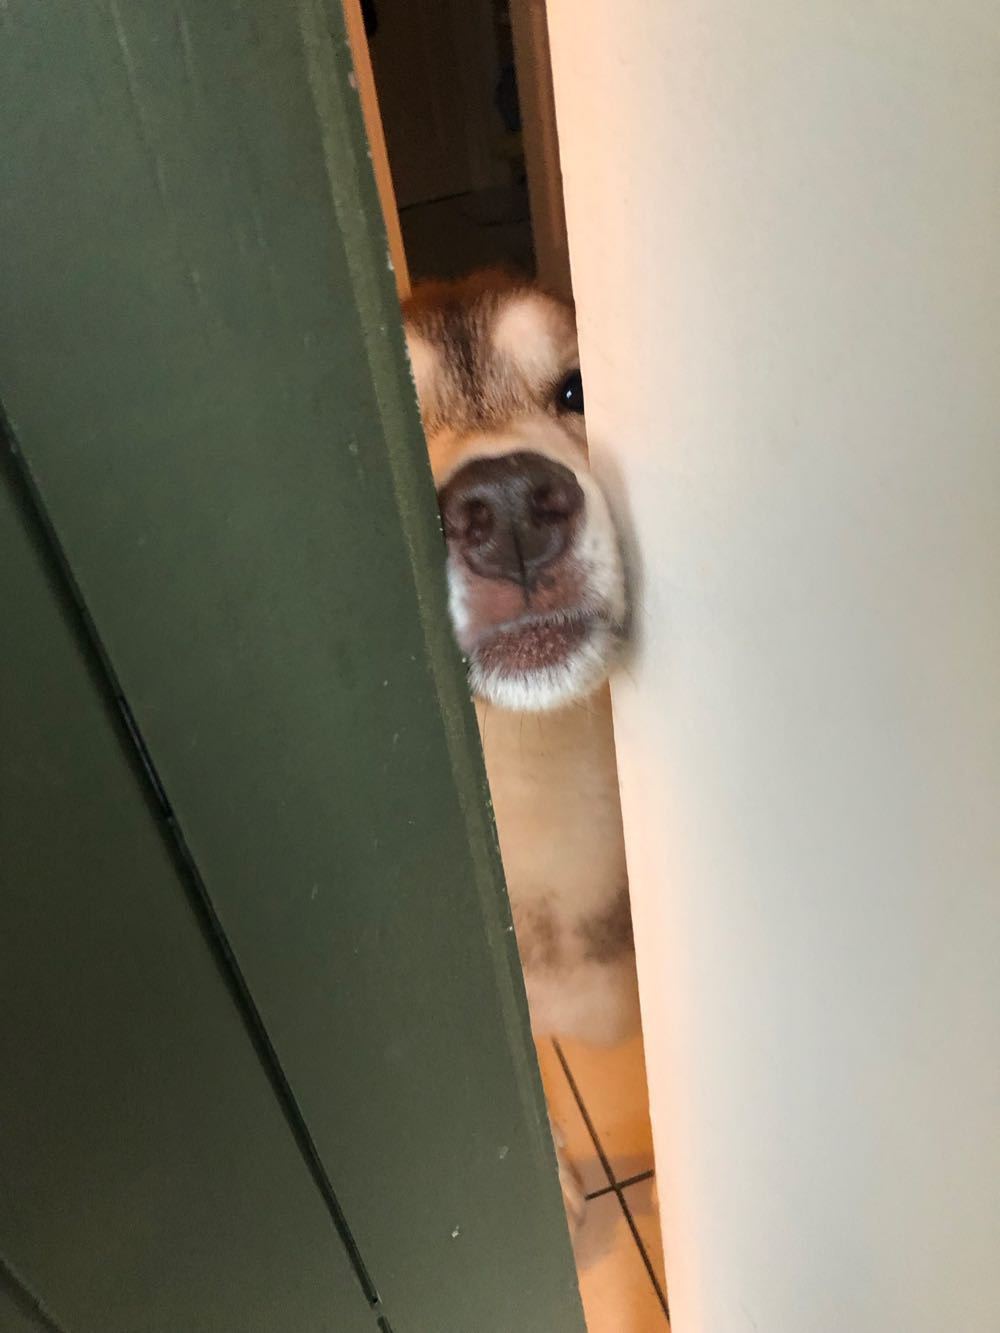 Door opened a crack to show the nose of an eager dog.